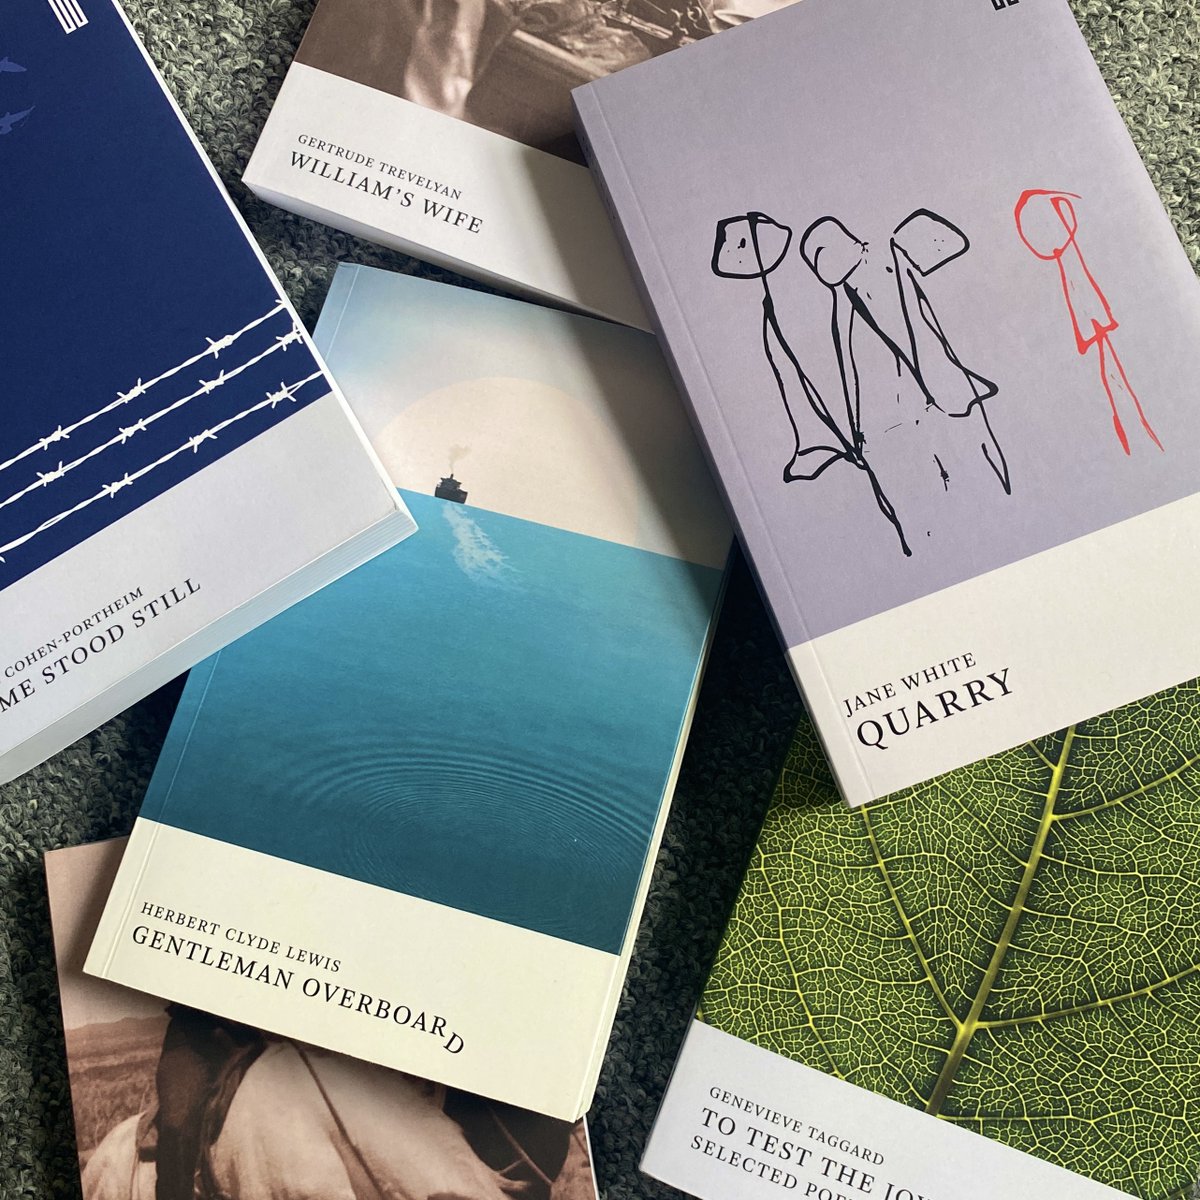 📚 Our new blog explores the 'Recovered Books' list for @bhousepress which republishes outstanding forgotten works of literature and reminds us that quality does not guarantee lasting success, often it’s just luck. ➡️ bit.ly/4dyFv7q